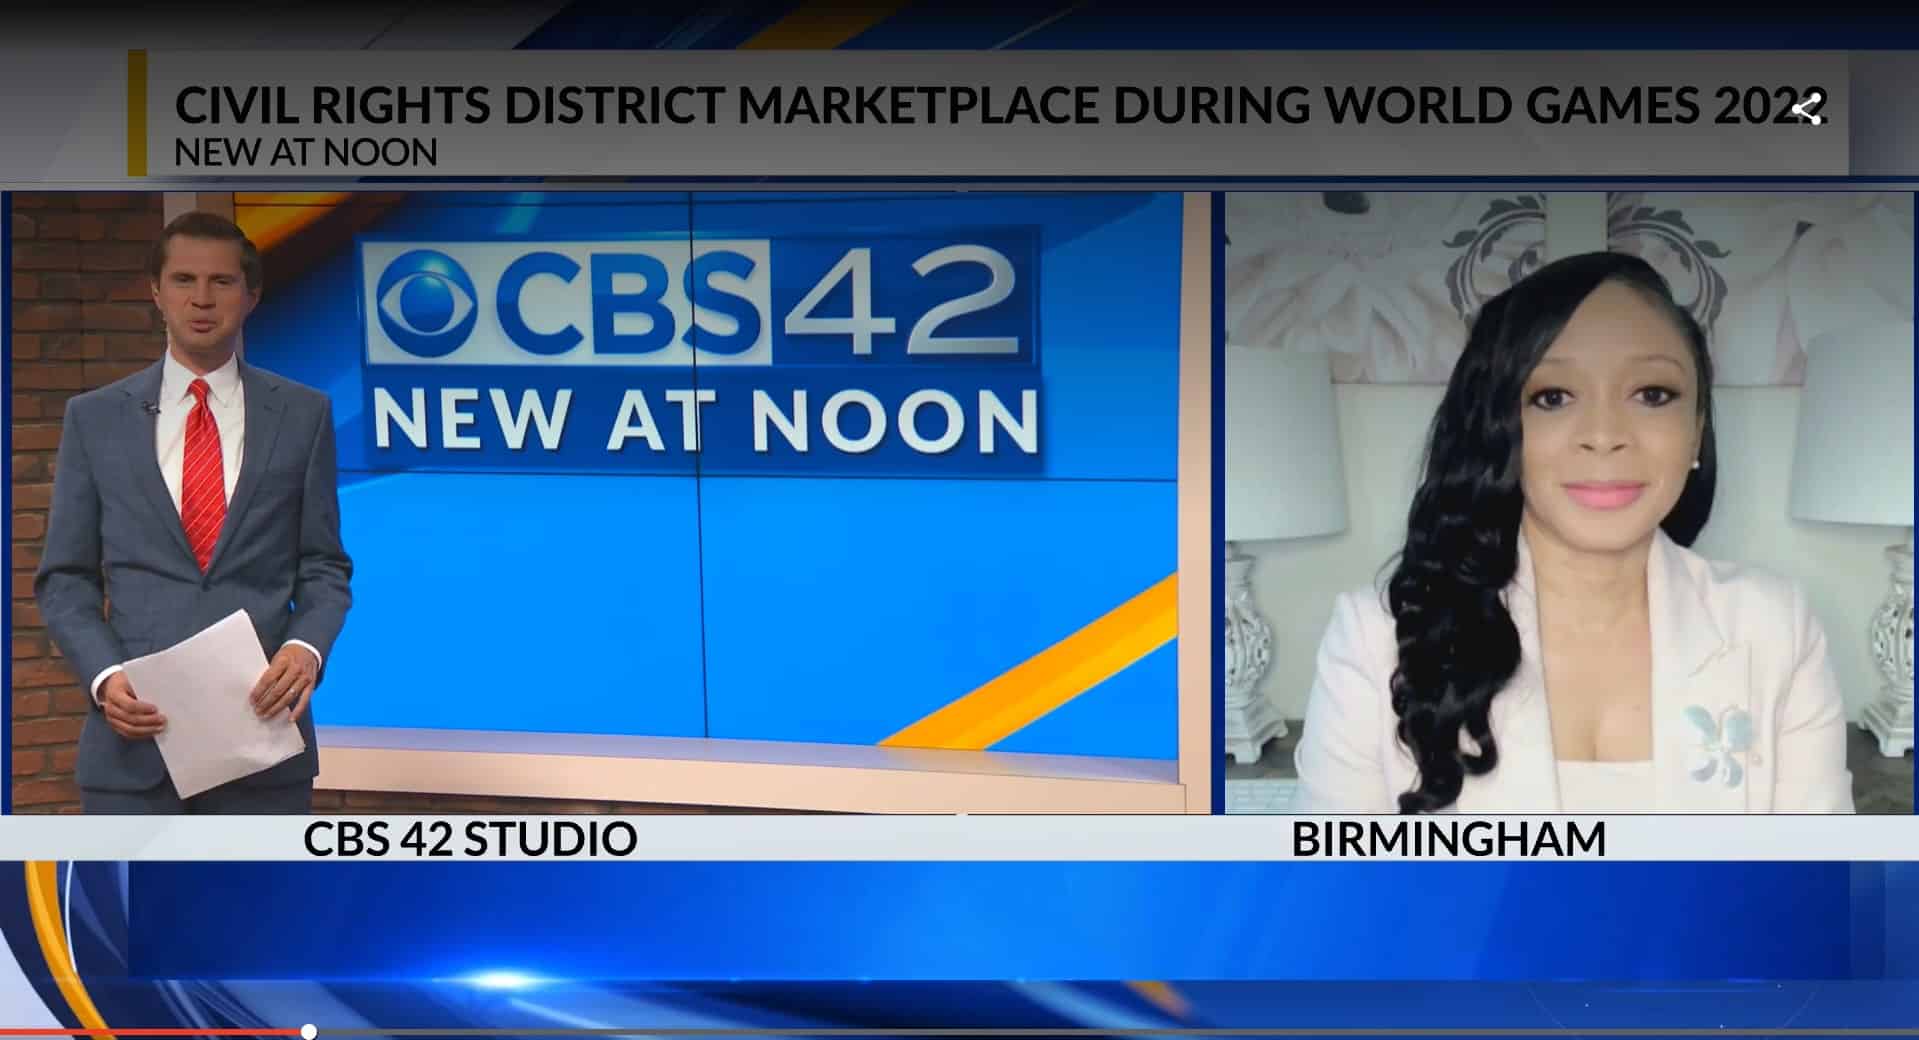 WATCH: Birmingham’s Civil Rights District Marketplace has a lot to offer